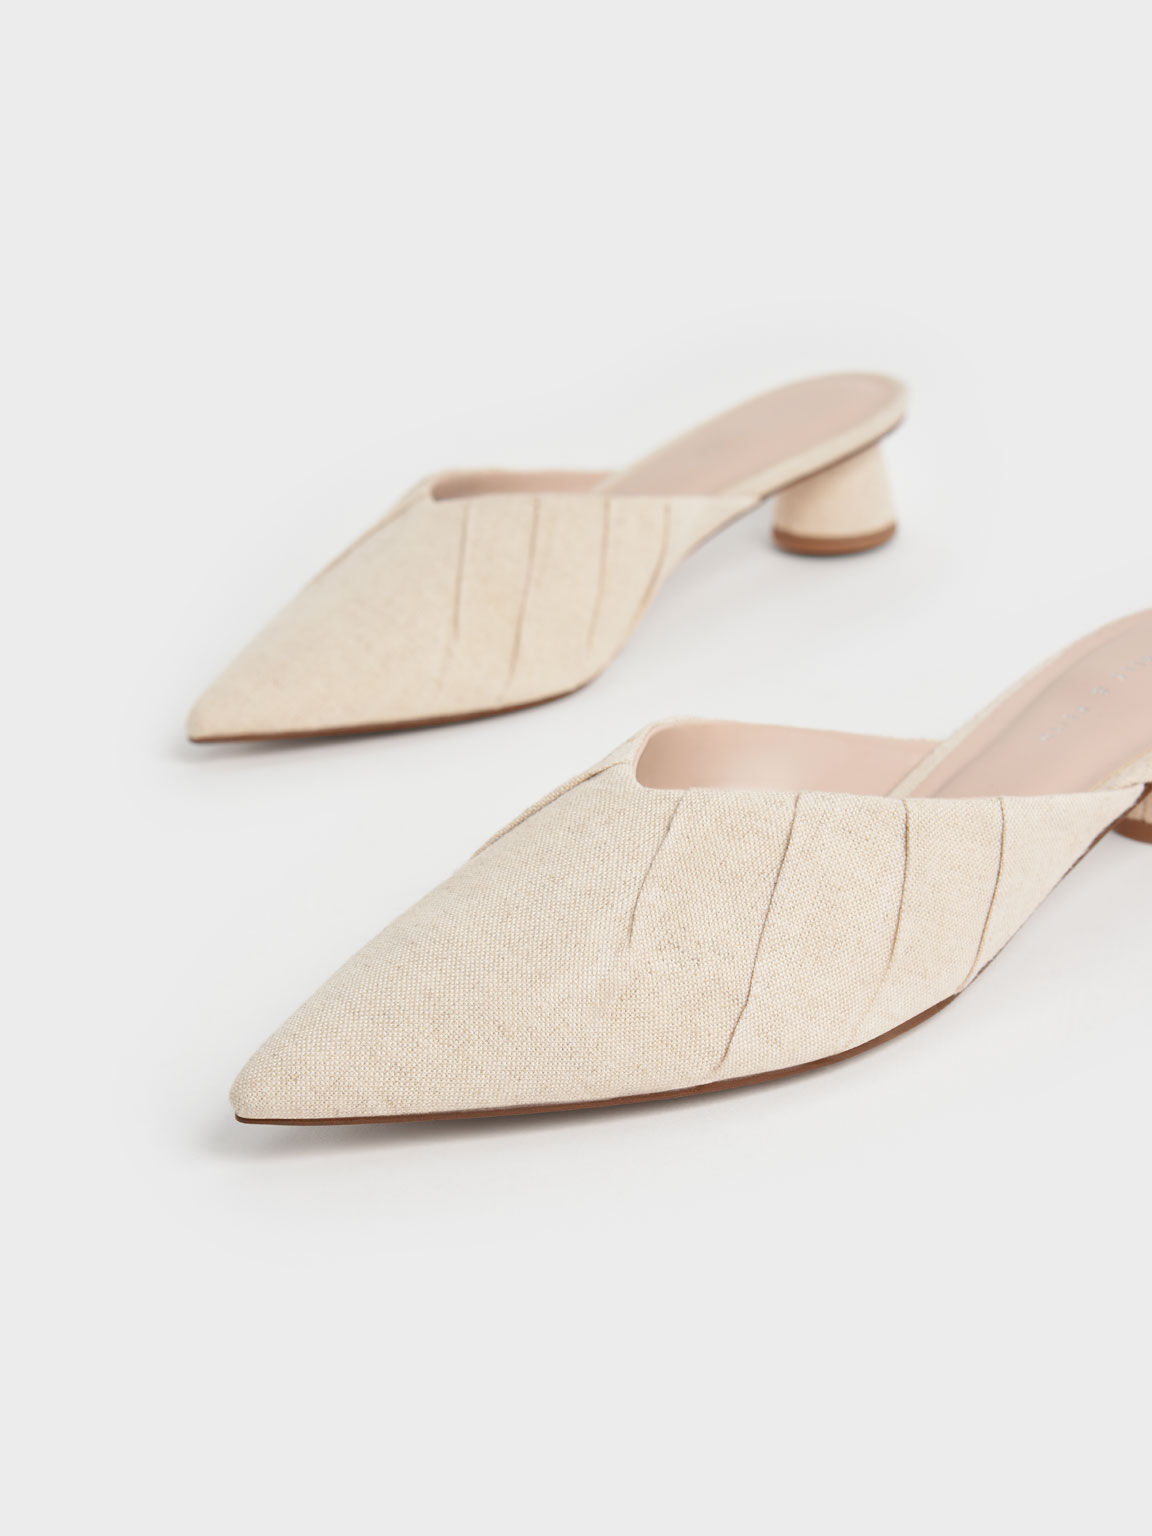 Chalk Linen Ruched Cylindrical Heel Mules - CHARLES & KEITH 